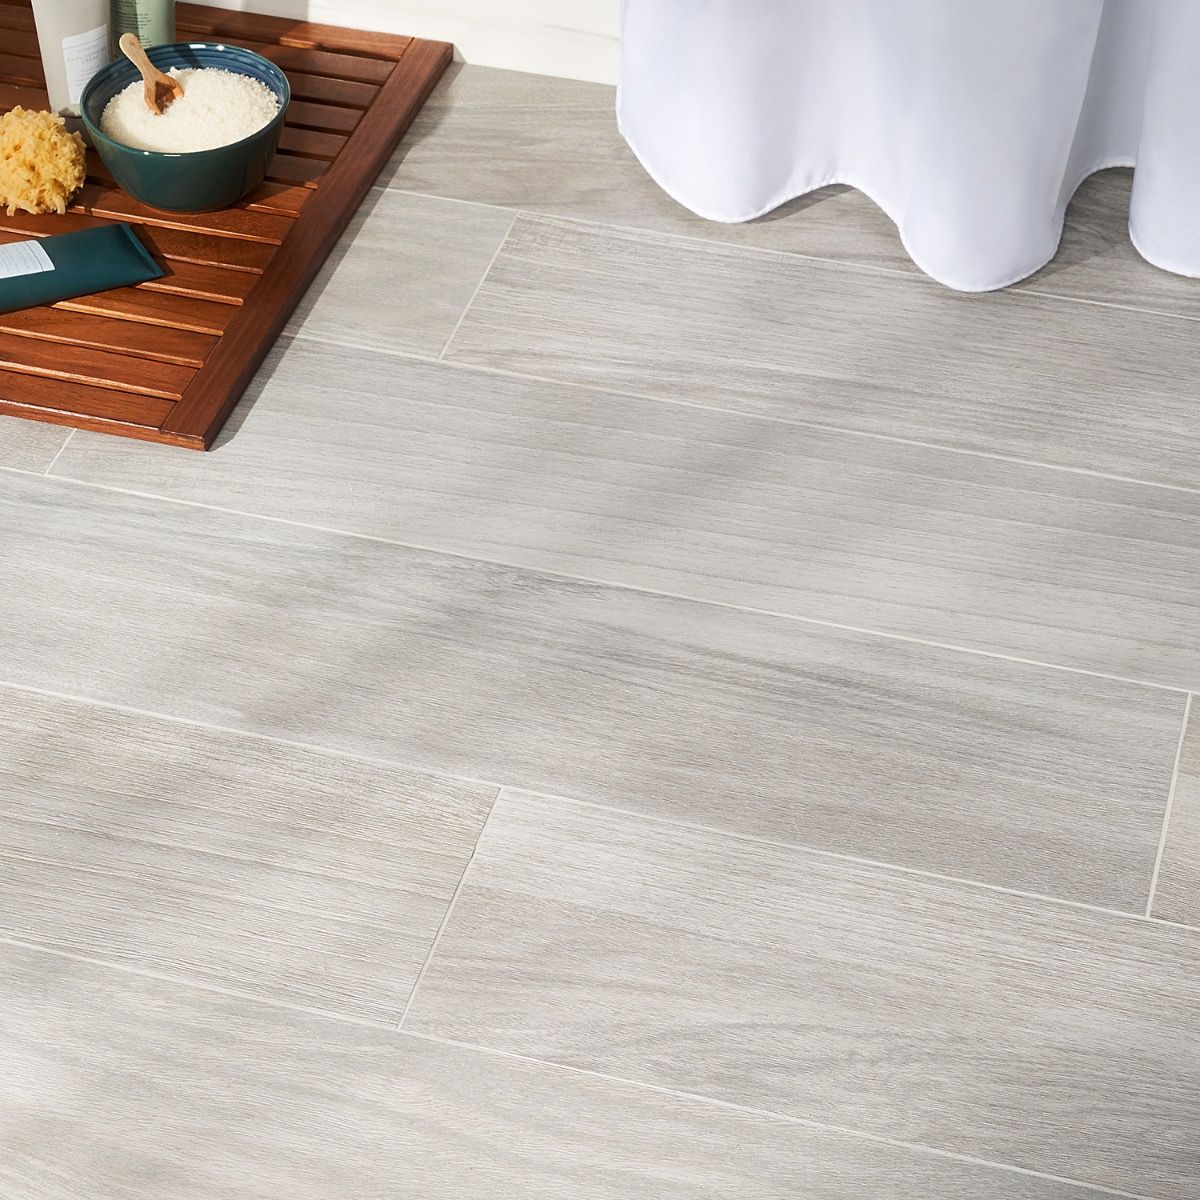 Artmore Tile Mulberry 6-Pack Brown 8-in x 48-in Matte Porcelain Wood Look Floor and Wall Tile